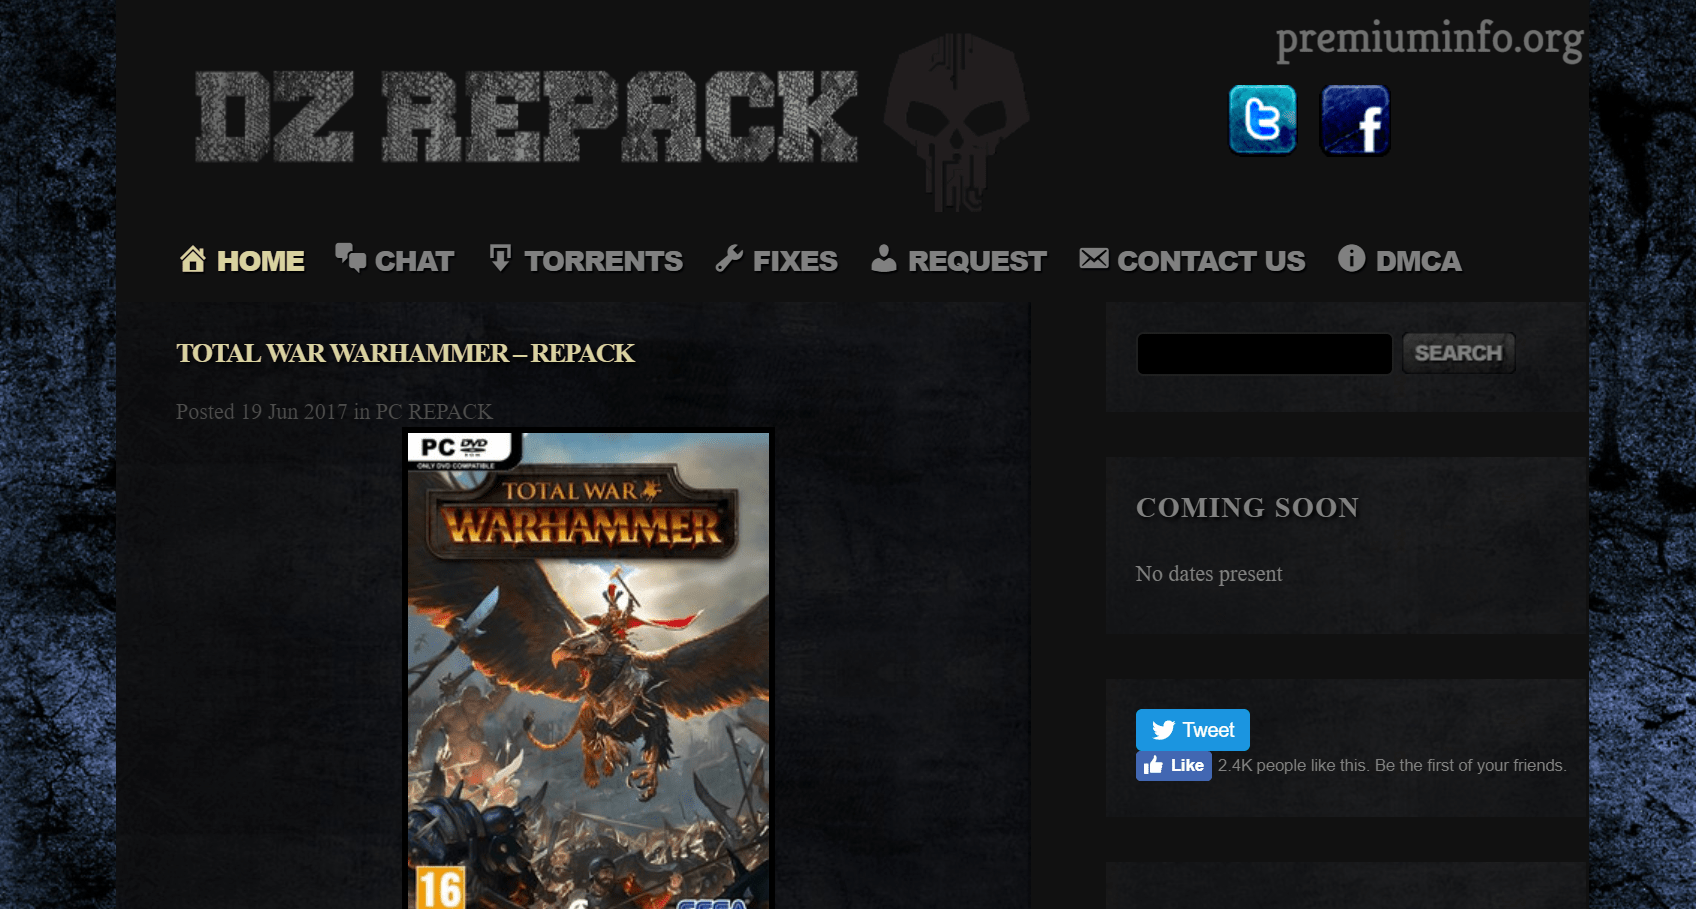 pc games cracked full version free download